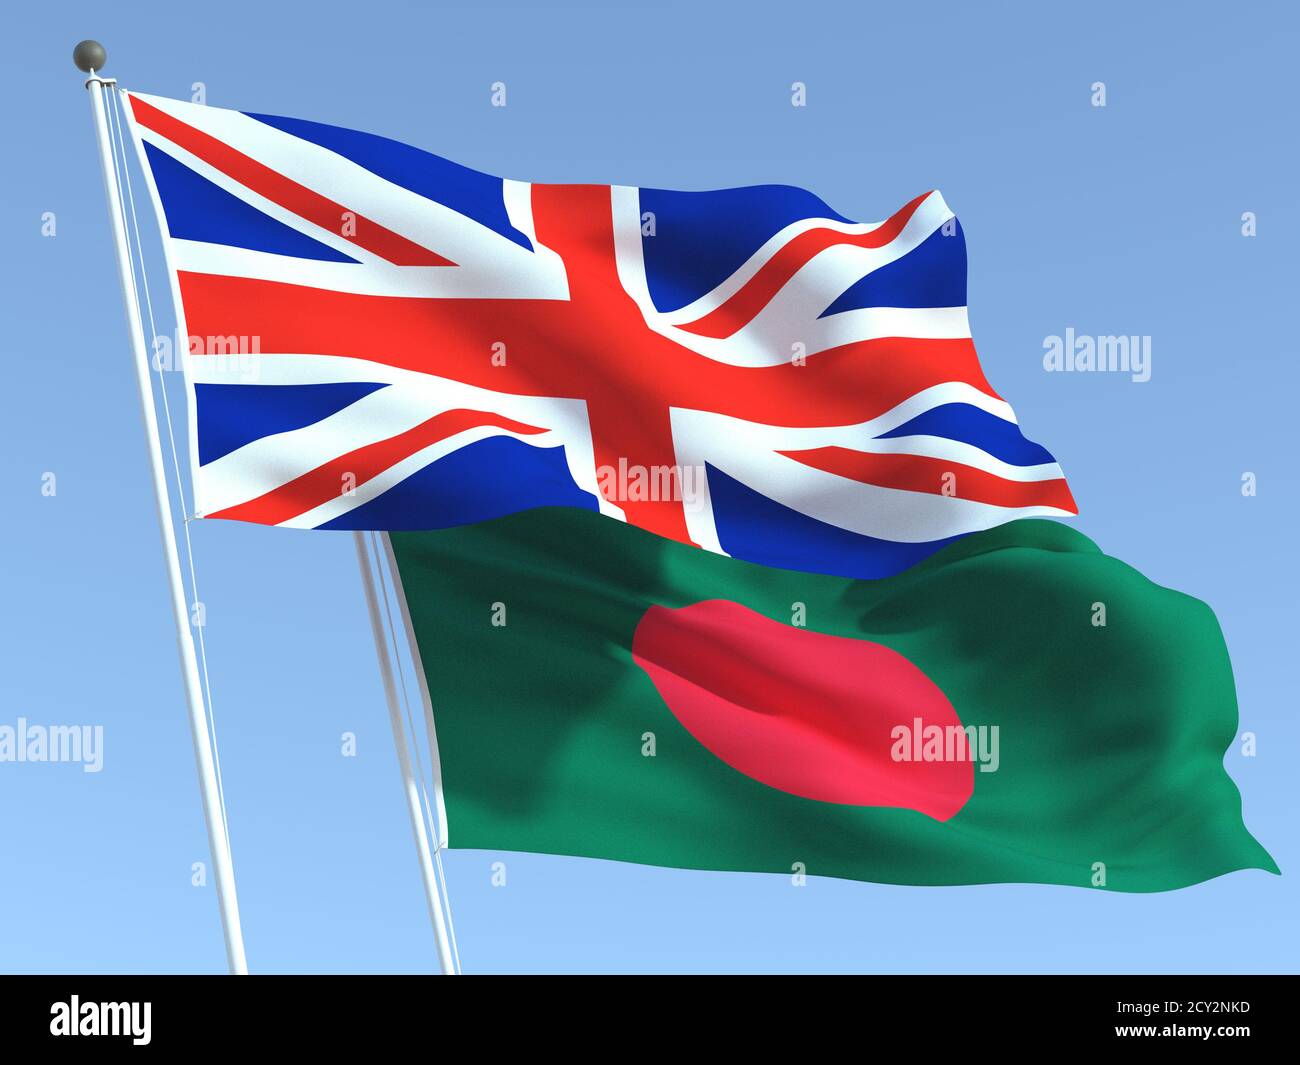 Two waving state flags of United Kingdom and Bangladesh on the blue sky. High - quality business background. 3d illustration Stock Photo